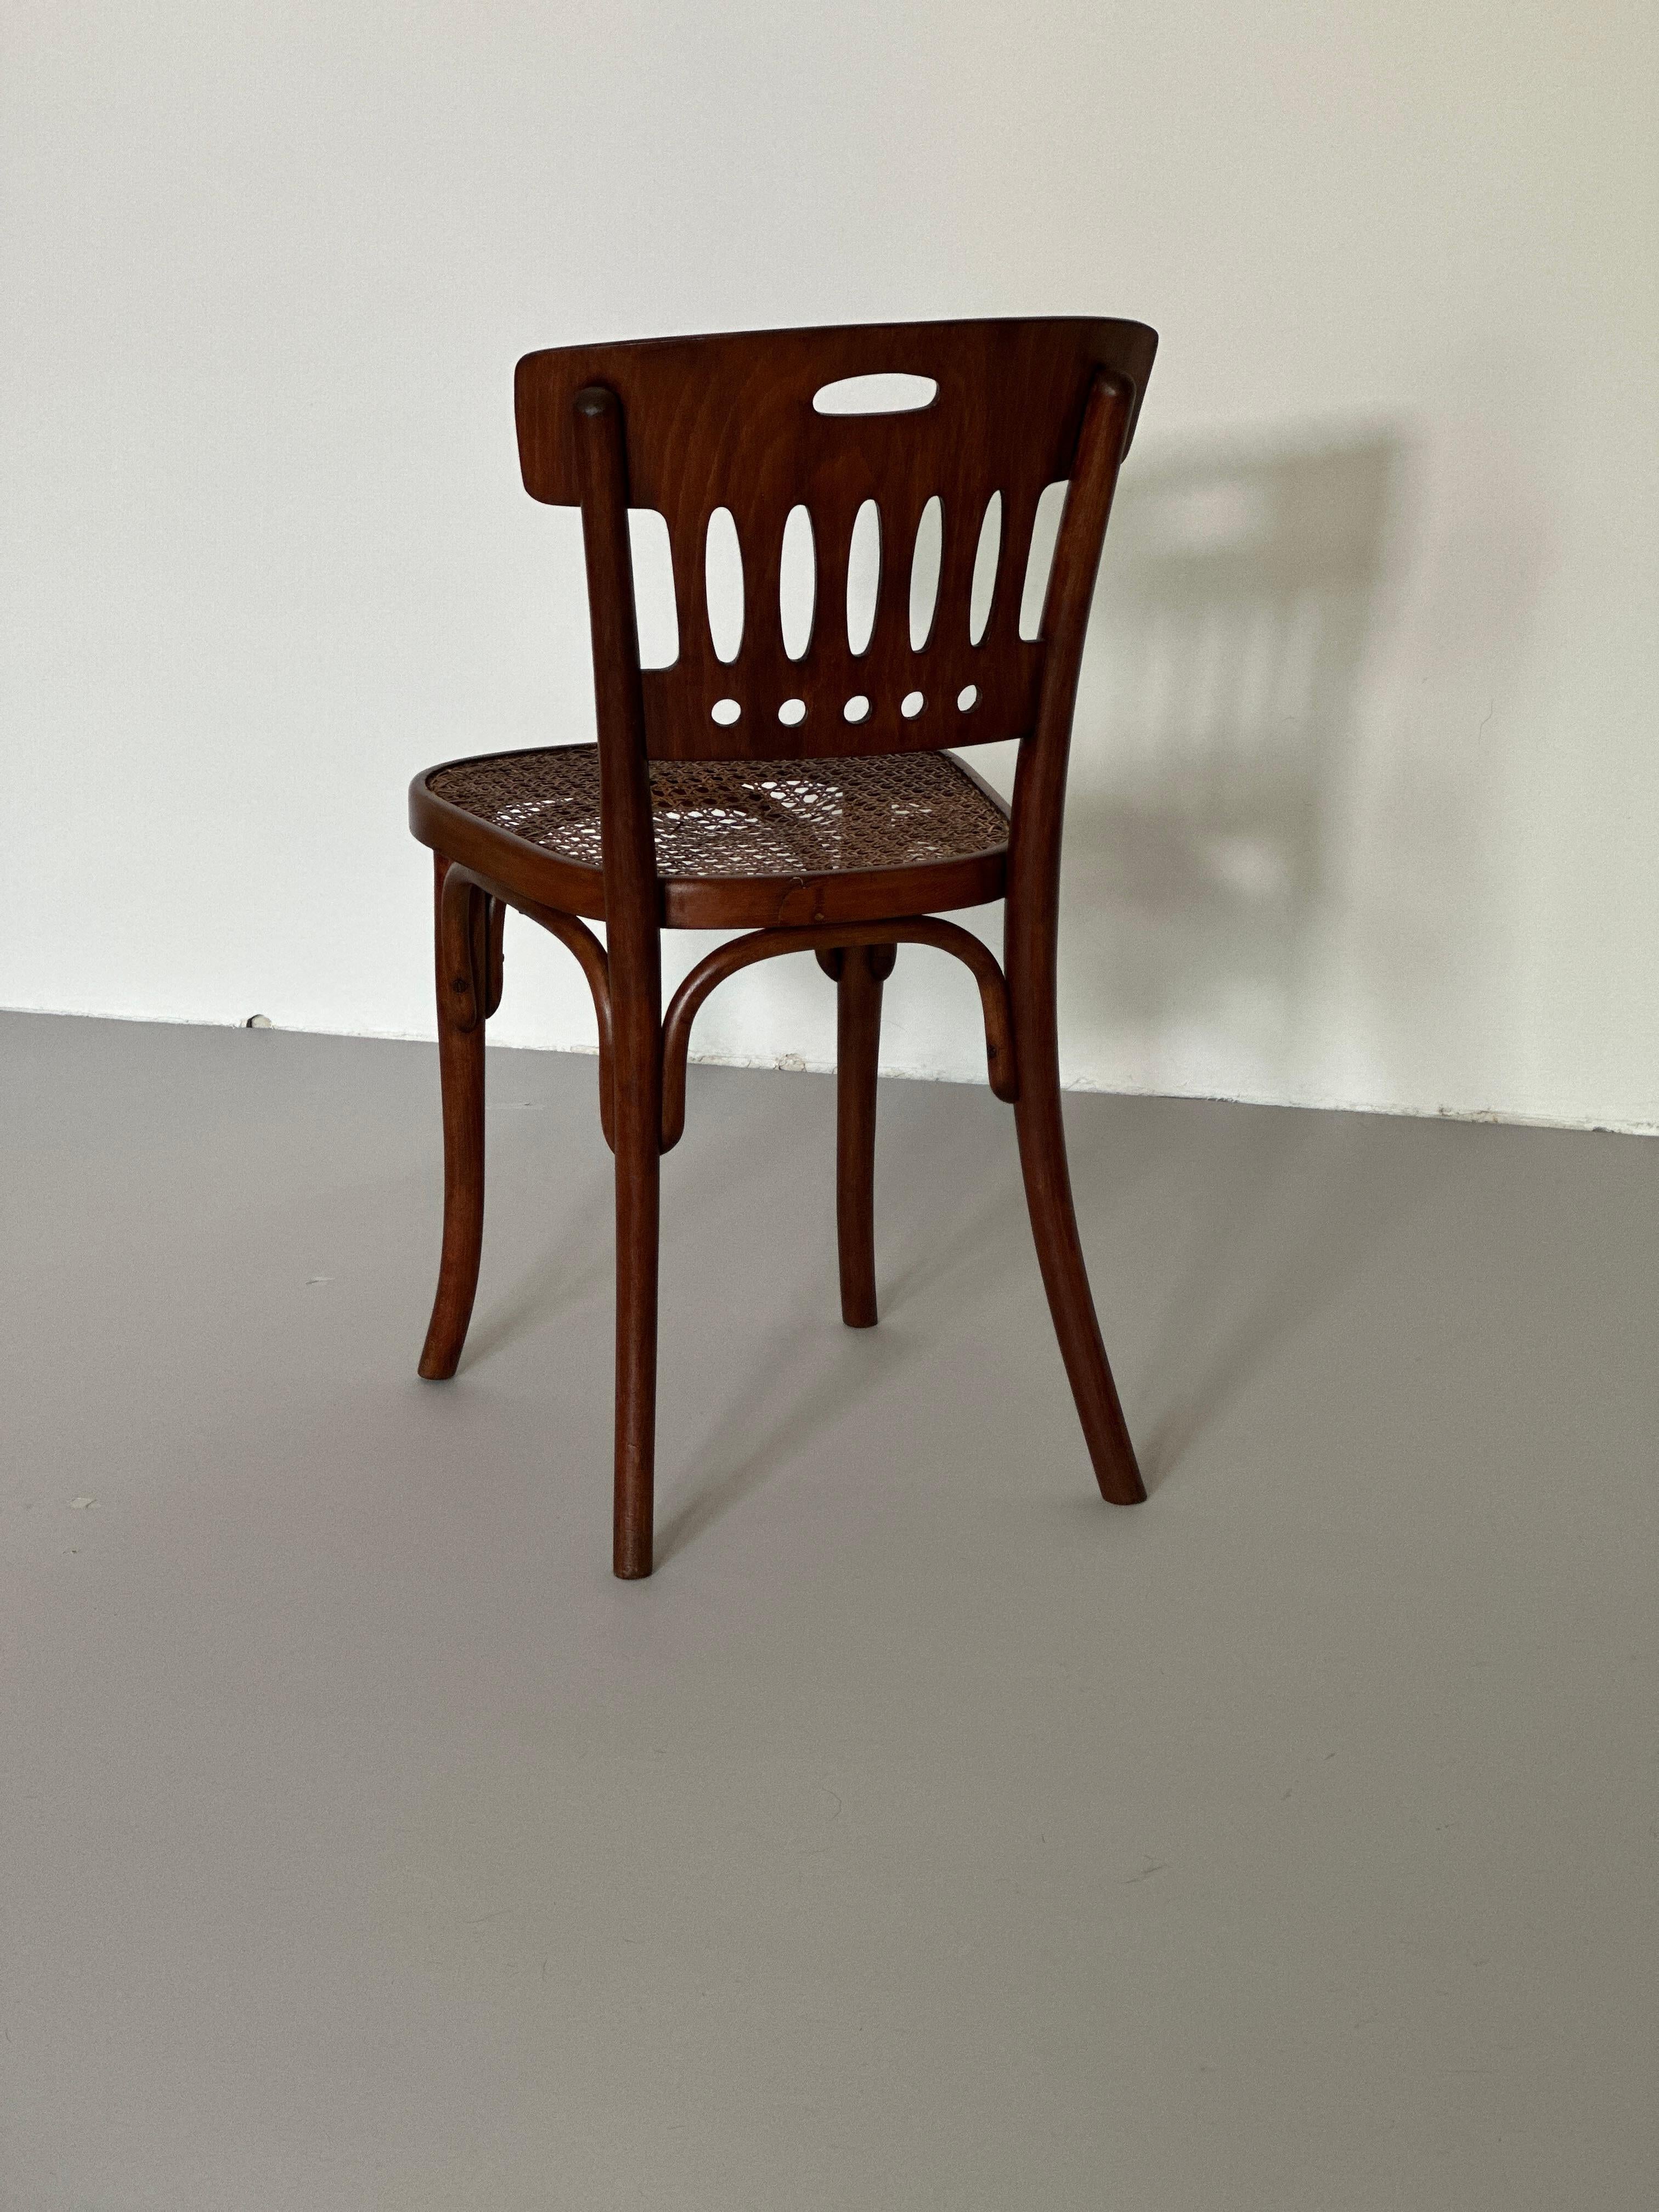 Thonet chair 1910s In Good Condition For Sale In Čelinac, BA